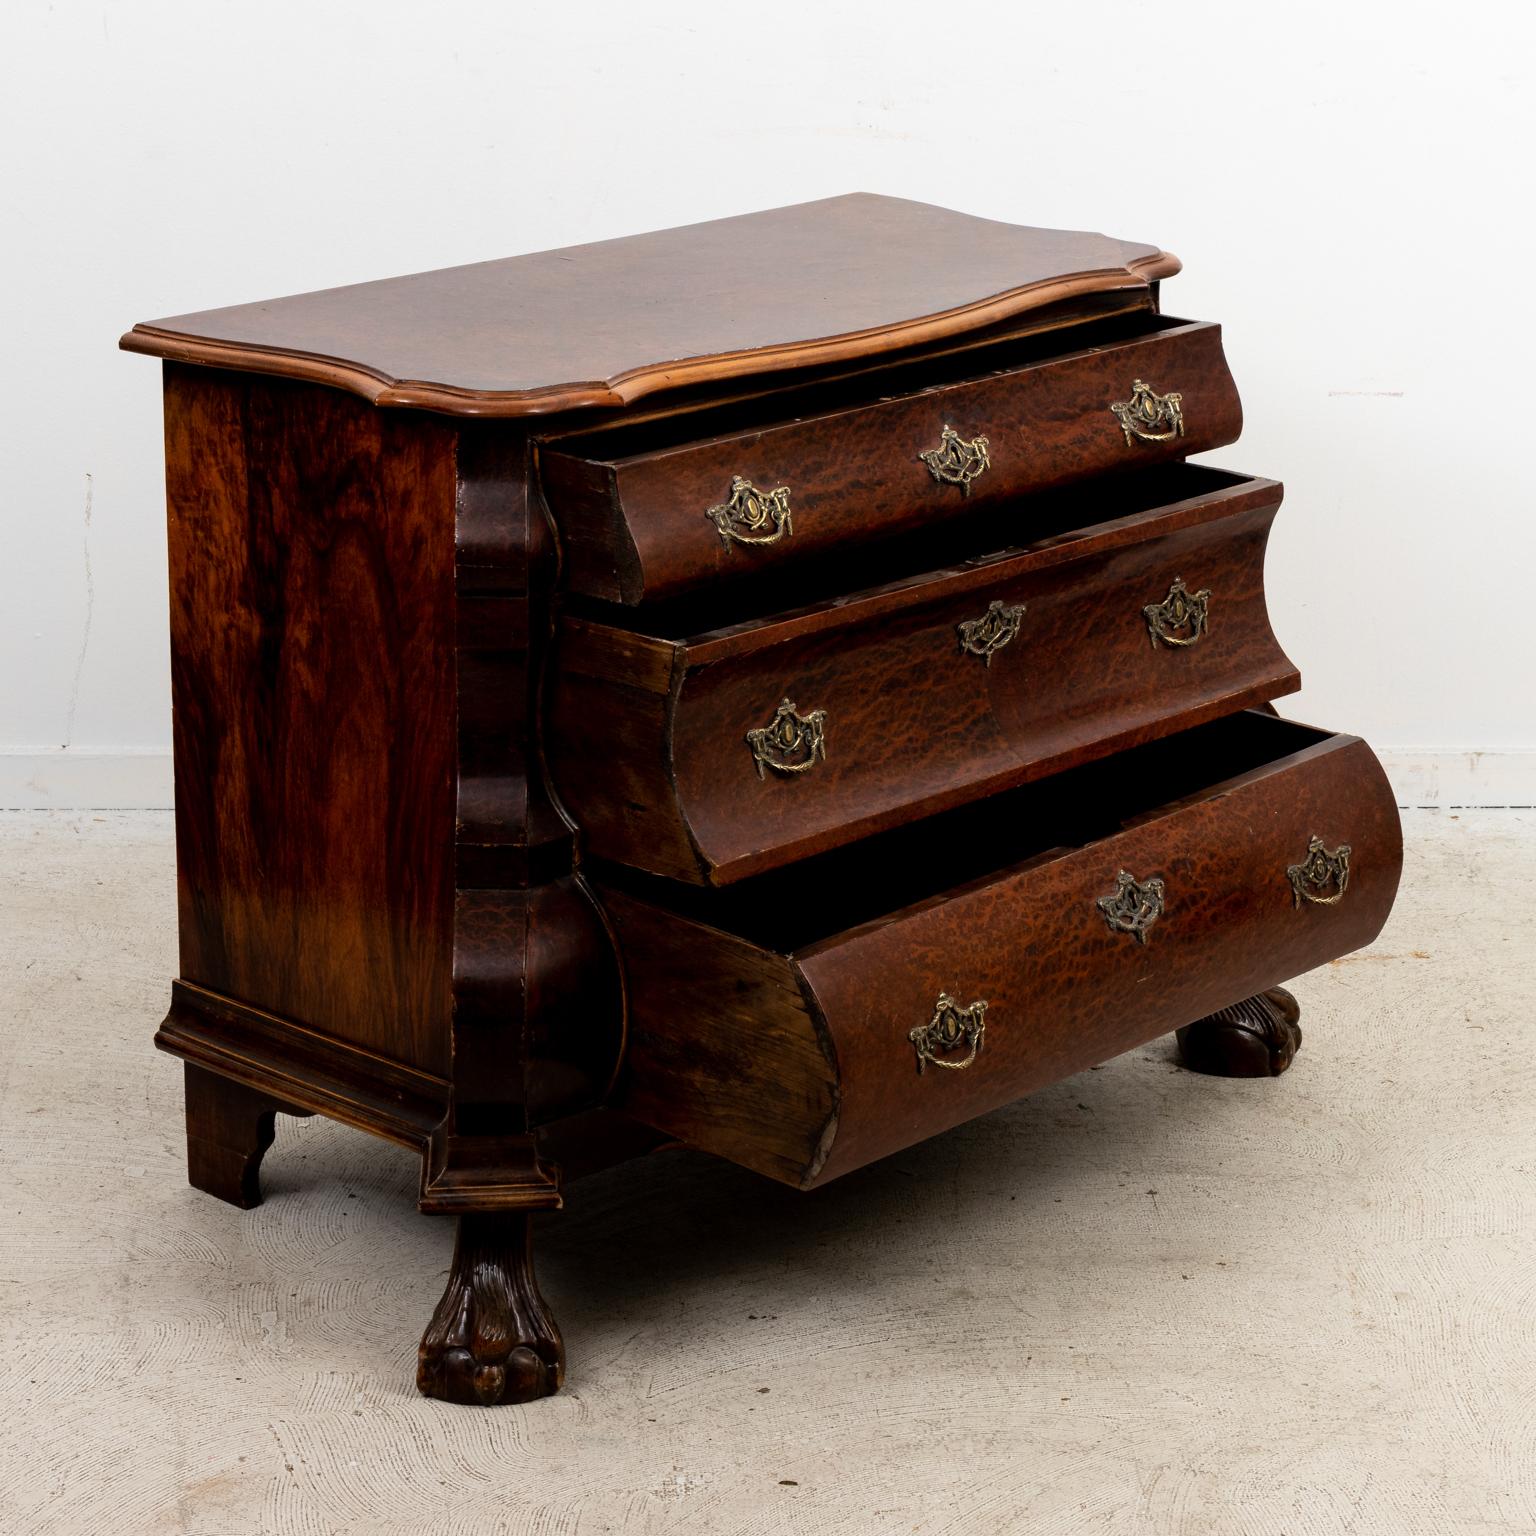 Early 20th Century Dutch Baroque Revival Bombe Burlwood Chest